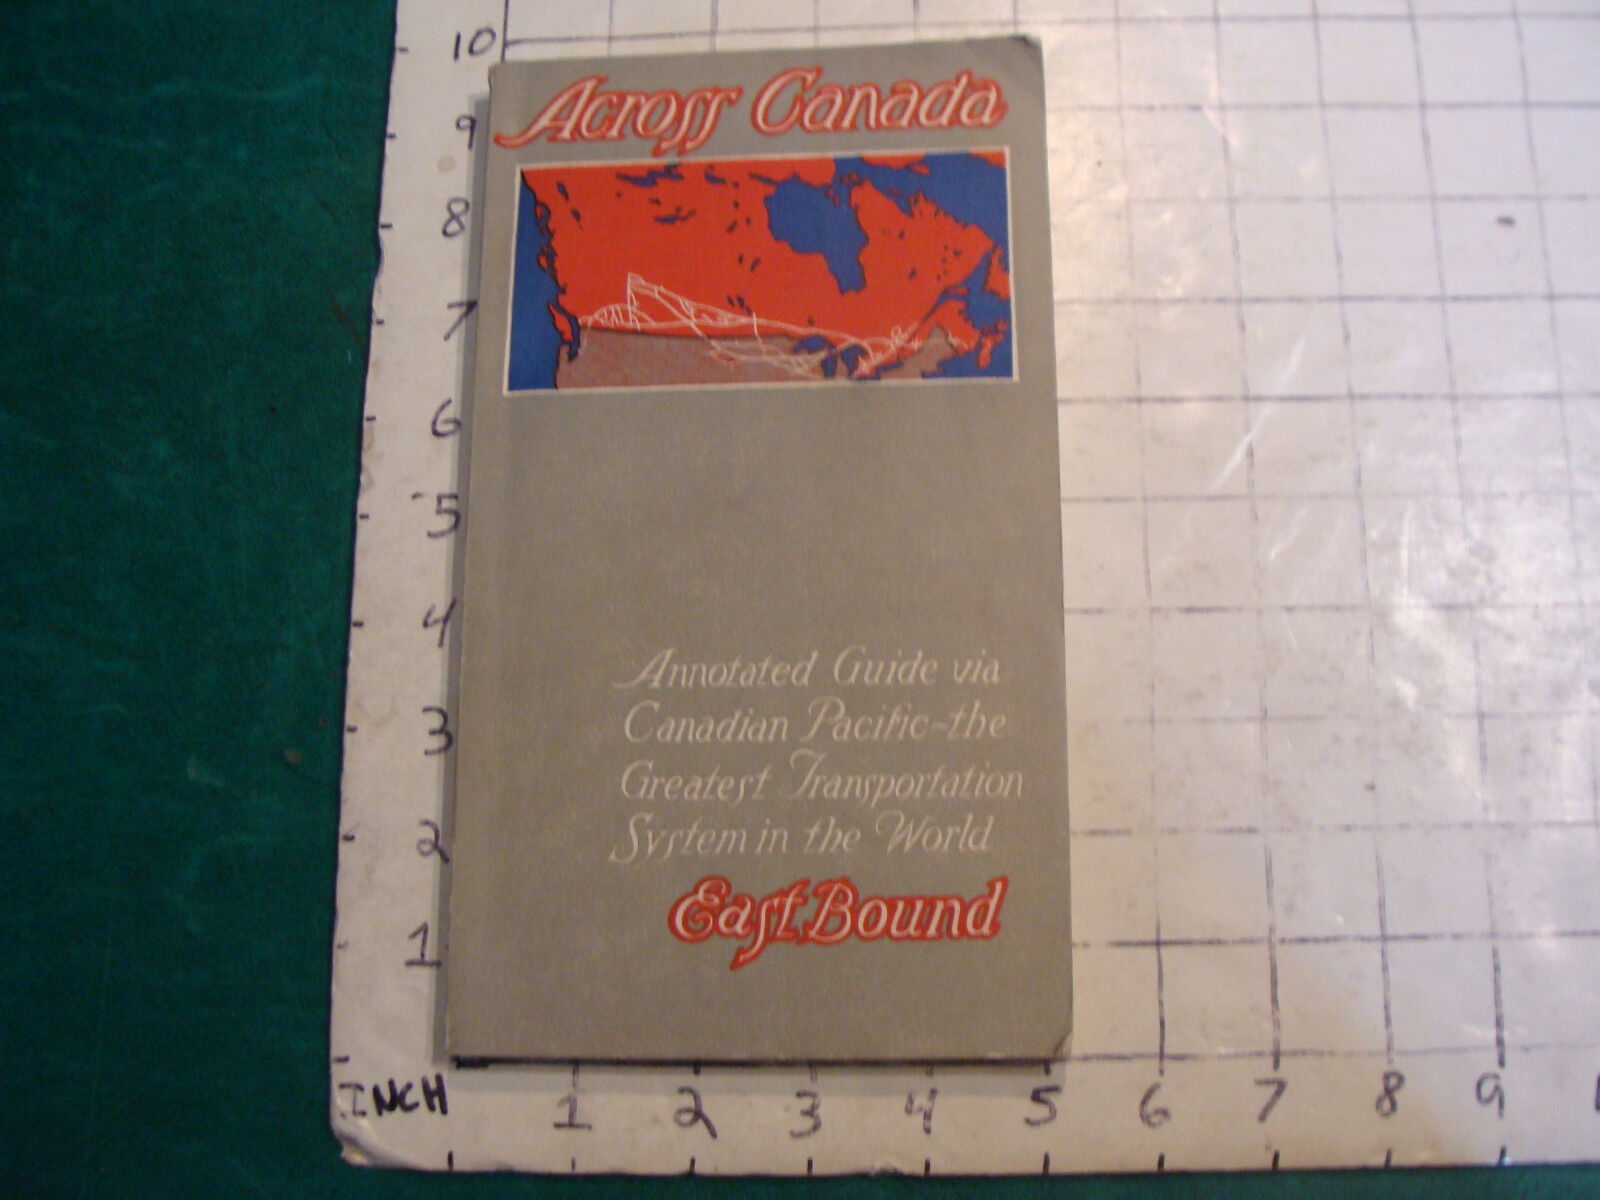 vintage book: ACROSS CANADA guide to Canadian Pacific East Bound 1915, 112pgs